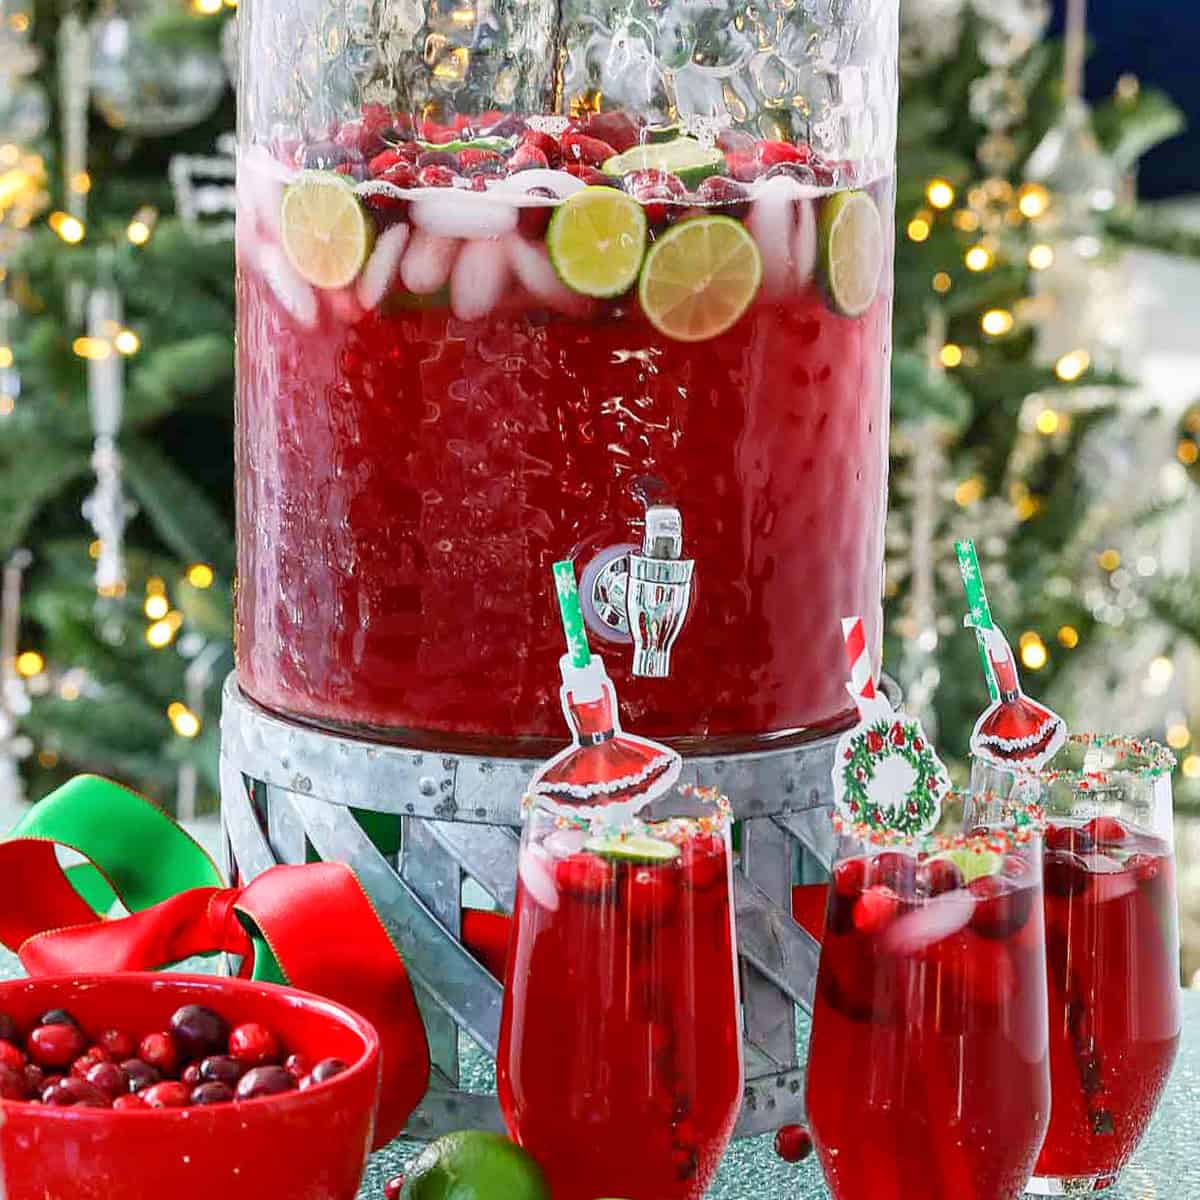 https://www.delicioustable.com/wp-content/uploads/2021/12/Christmas-Punch-featured-1.jpg